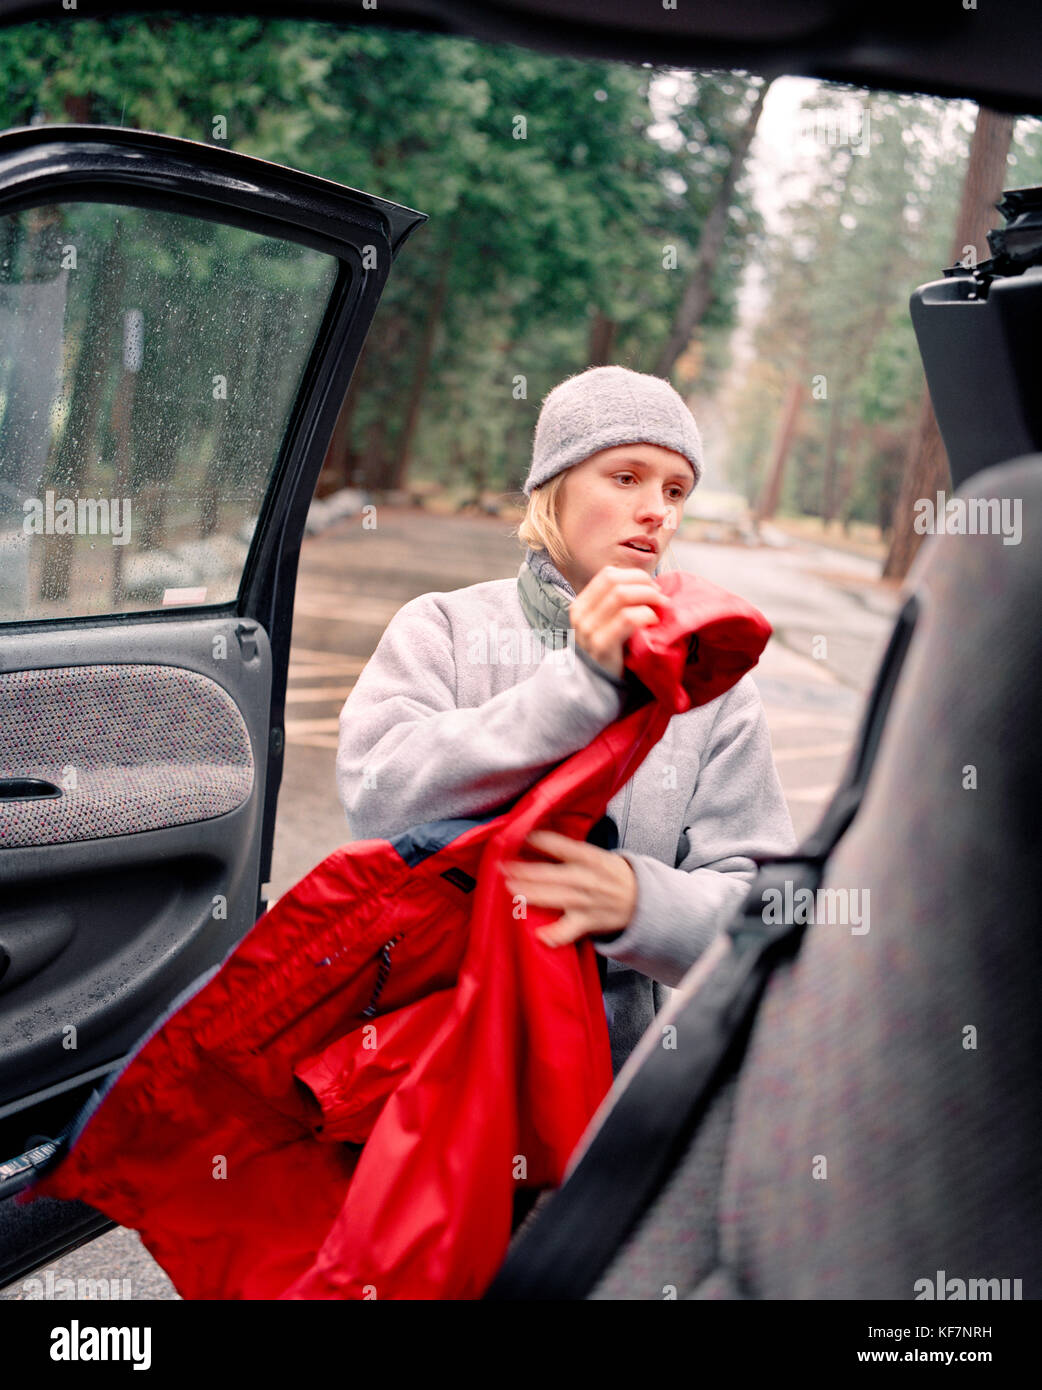 USA, California, Yosemite National Park, a young woman prepares to go hiking in the rain Stock Photo